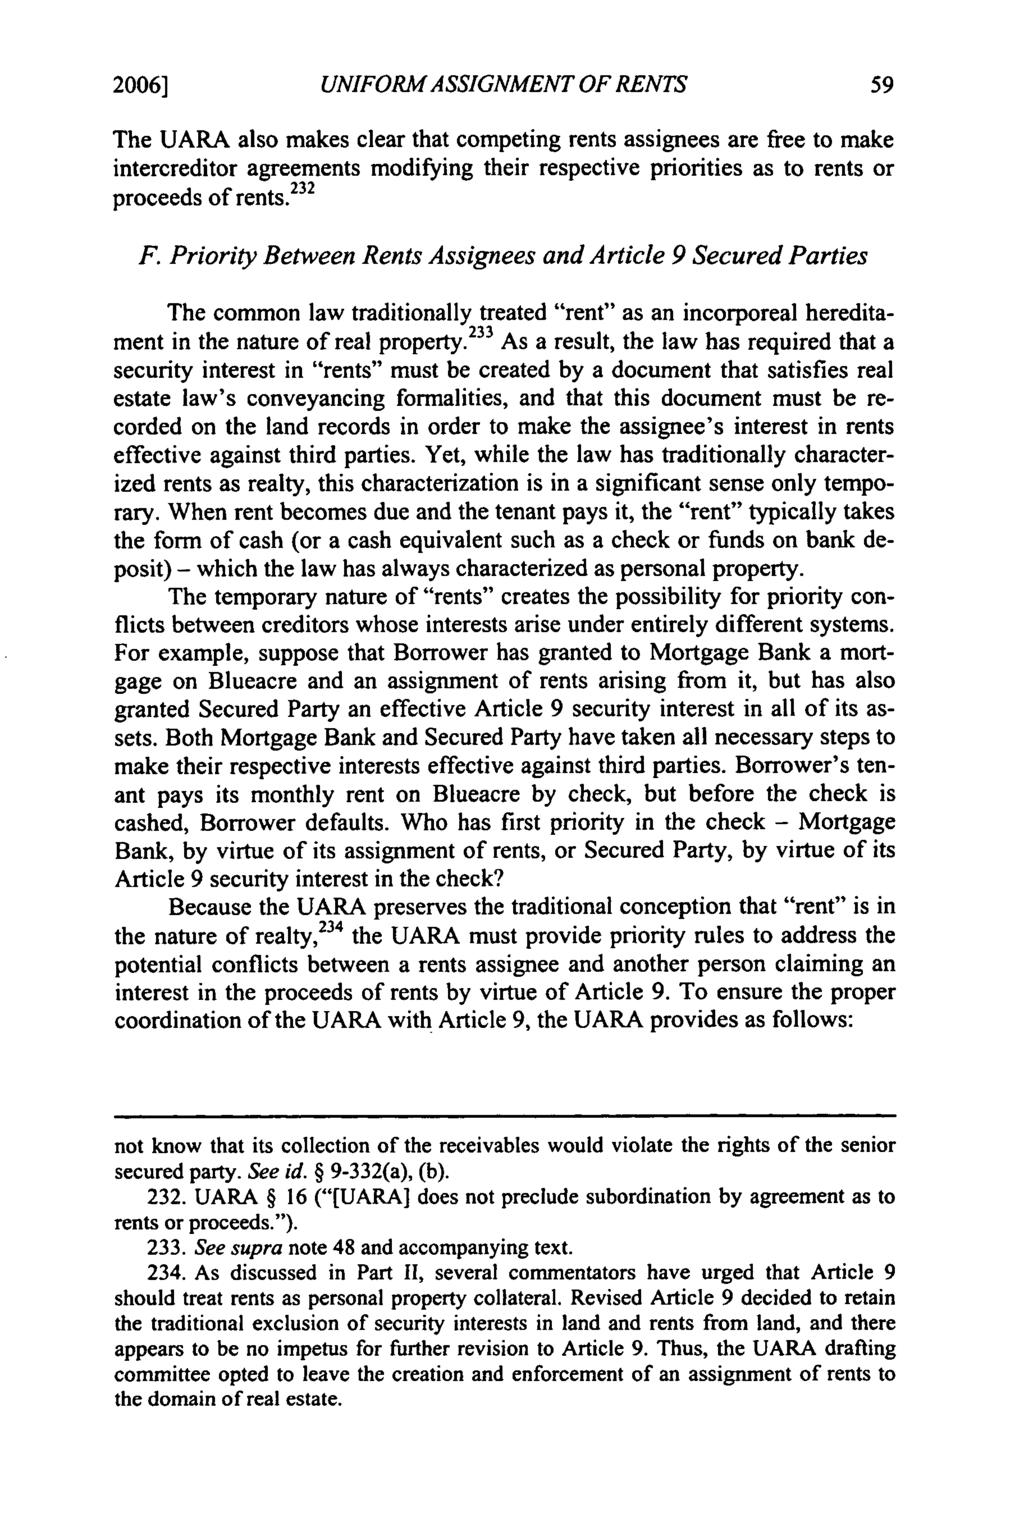 2006] Freyermuth: Freyermuth: Modernizing Security in Rents UNIFORM ASSIGNMENT OF RENTS The UARA also makes clear that competing rents assignees are free to make intercreditor agreements modifying